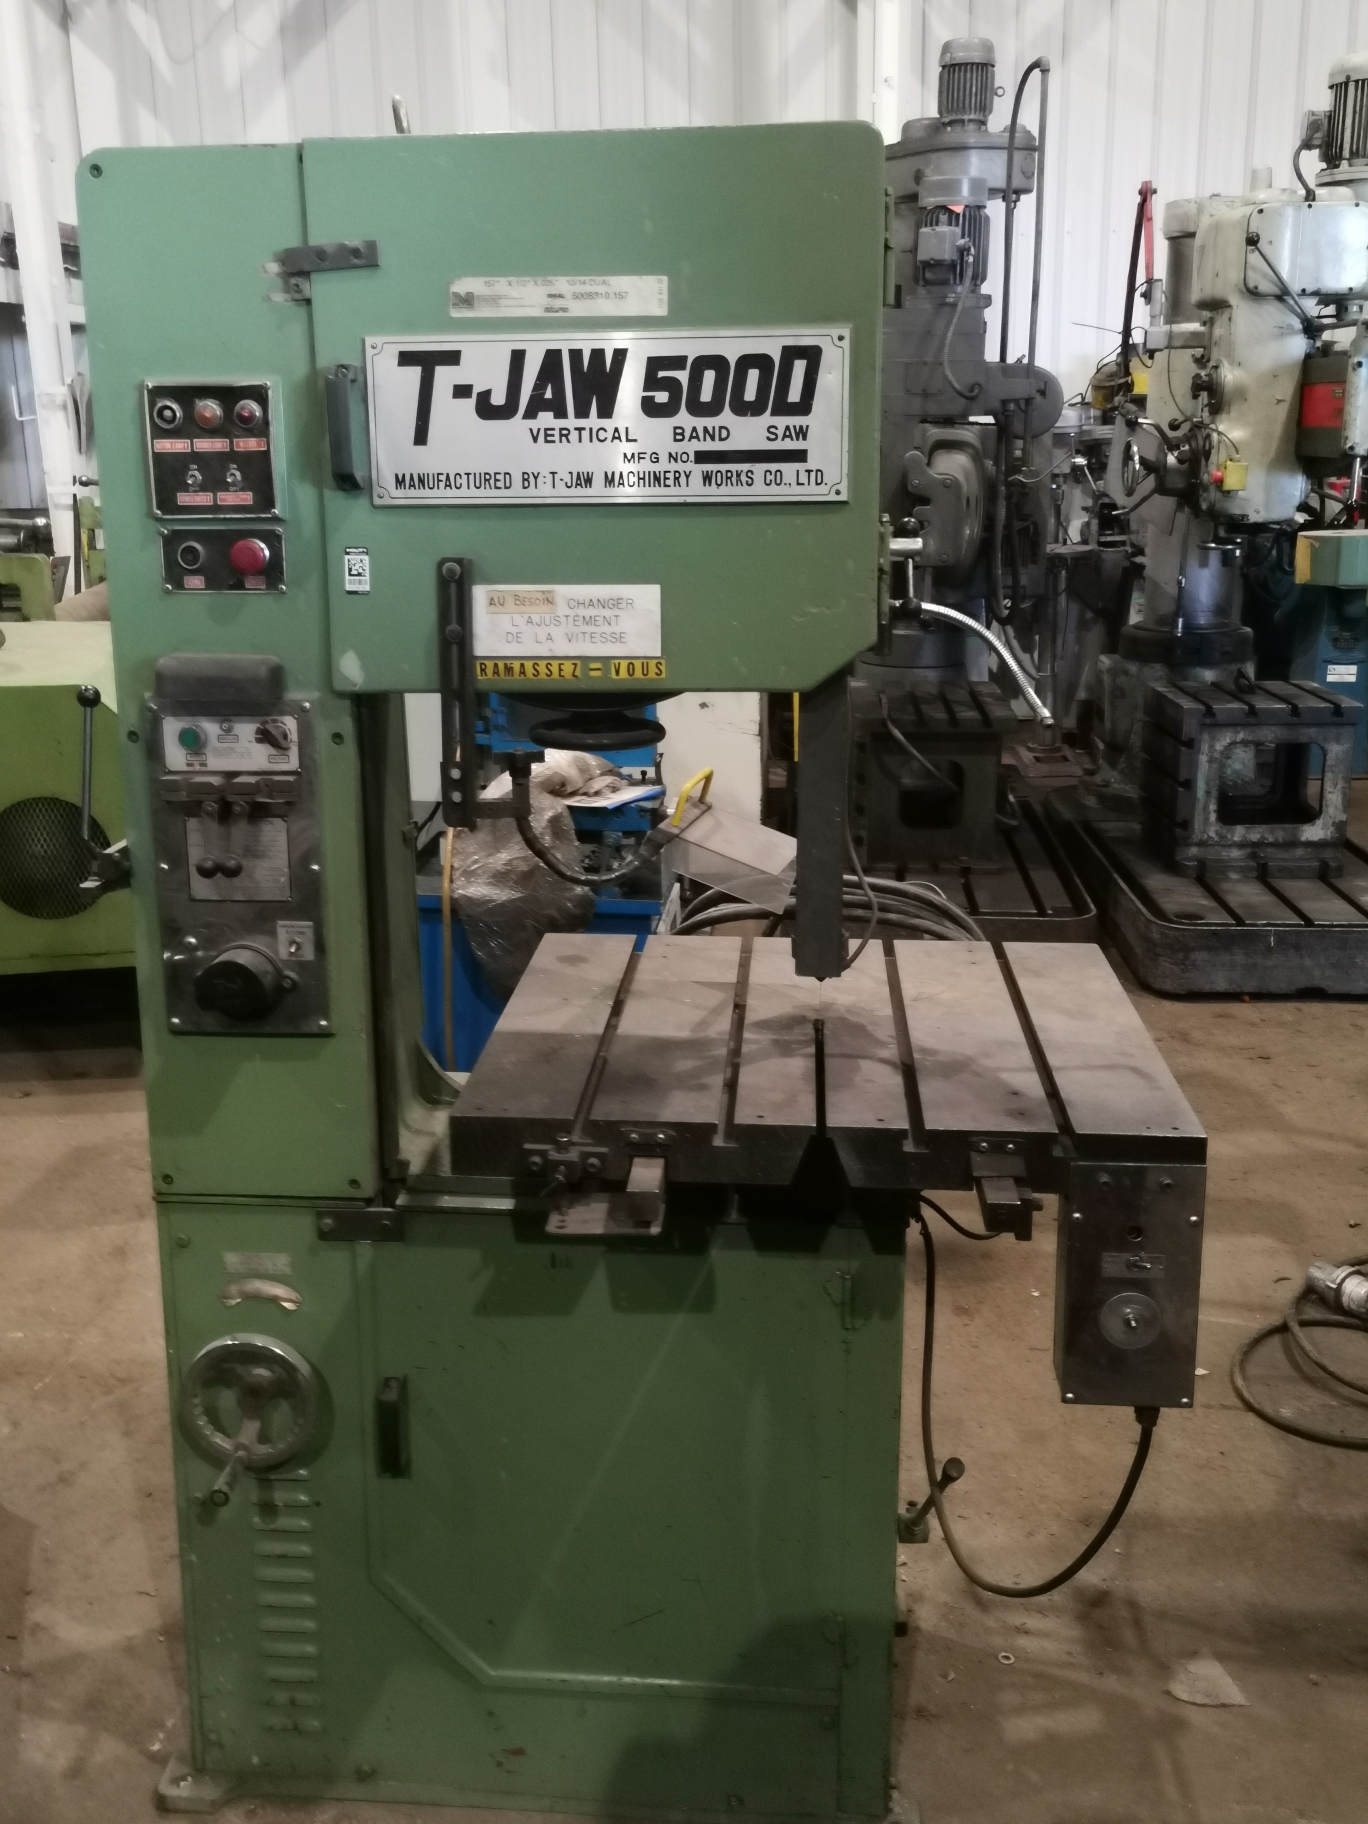 T-JAW 500D